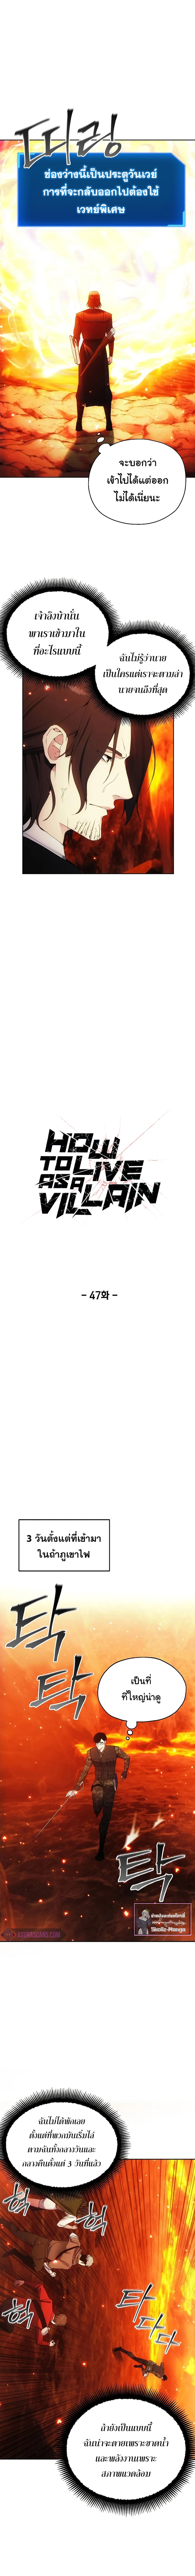 How to Live as a Villain47 (4)